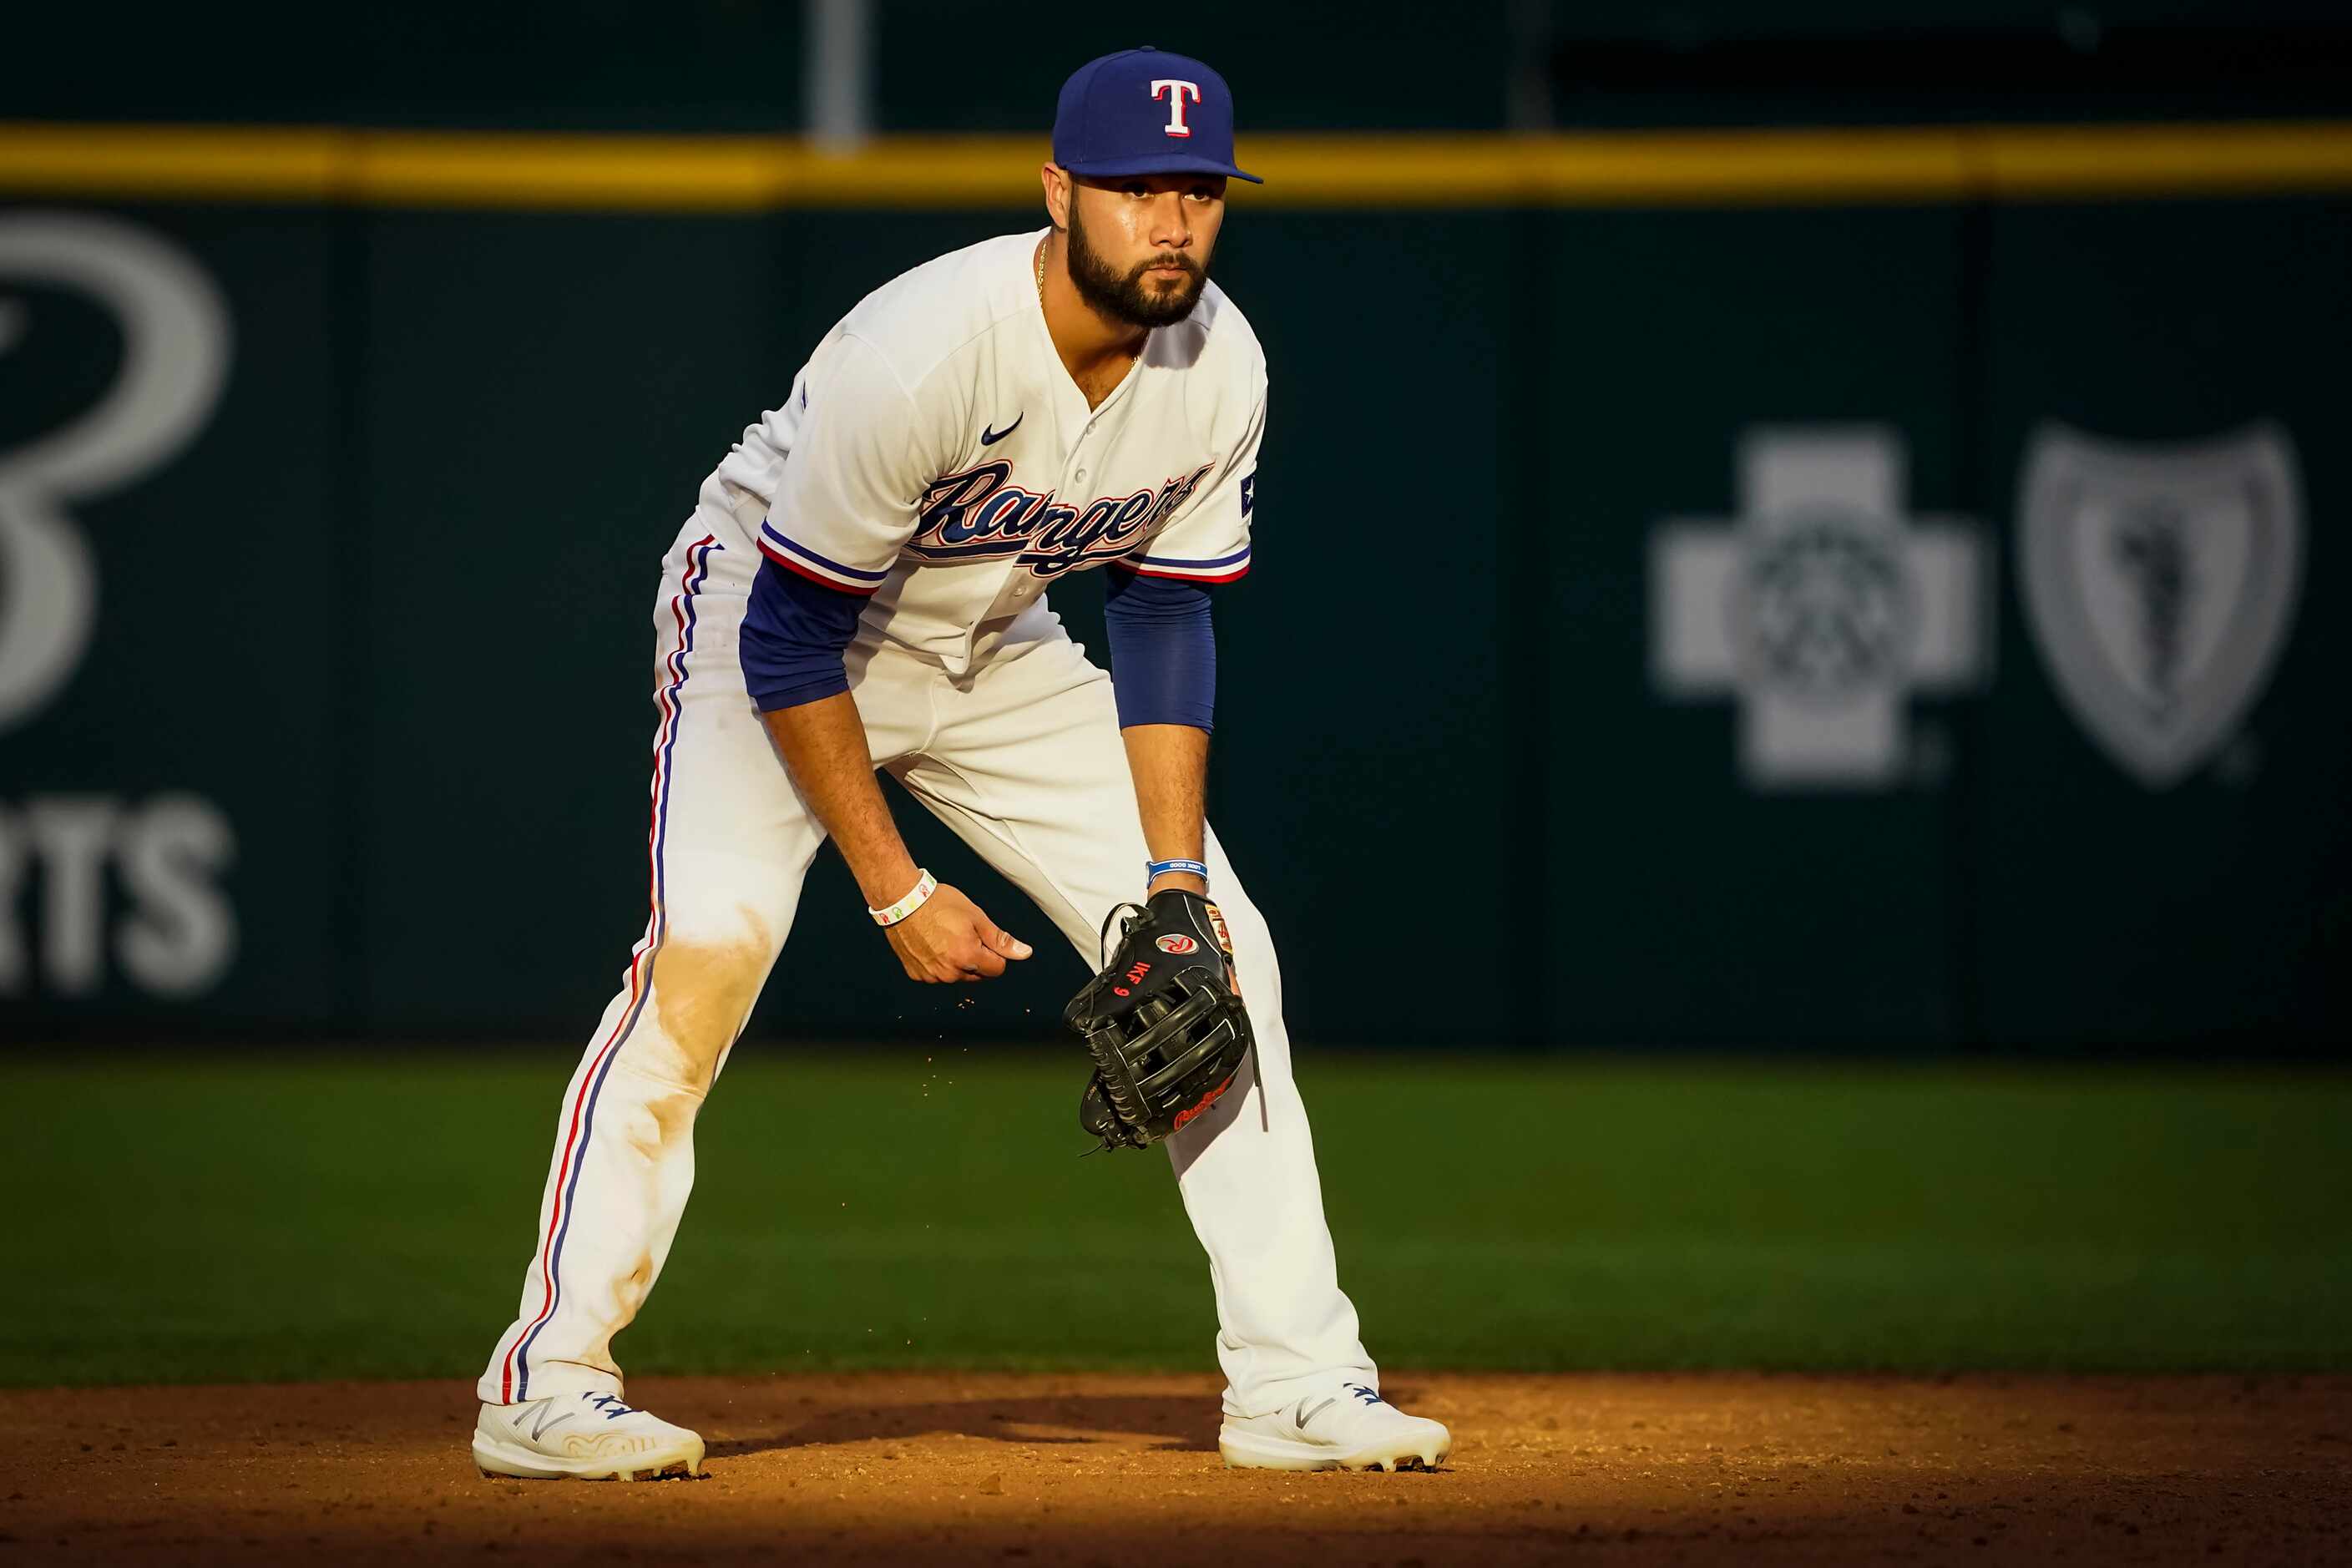 Texas Rangers shortstop Isiah Kiner-Falefa waits for a pitch during the third inning against...